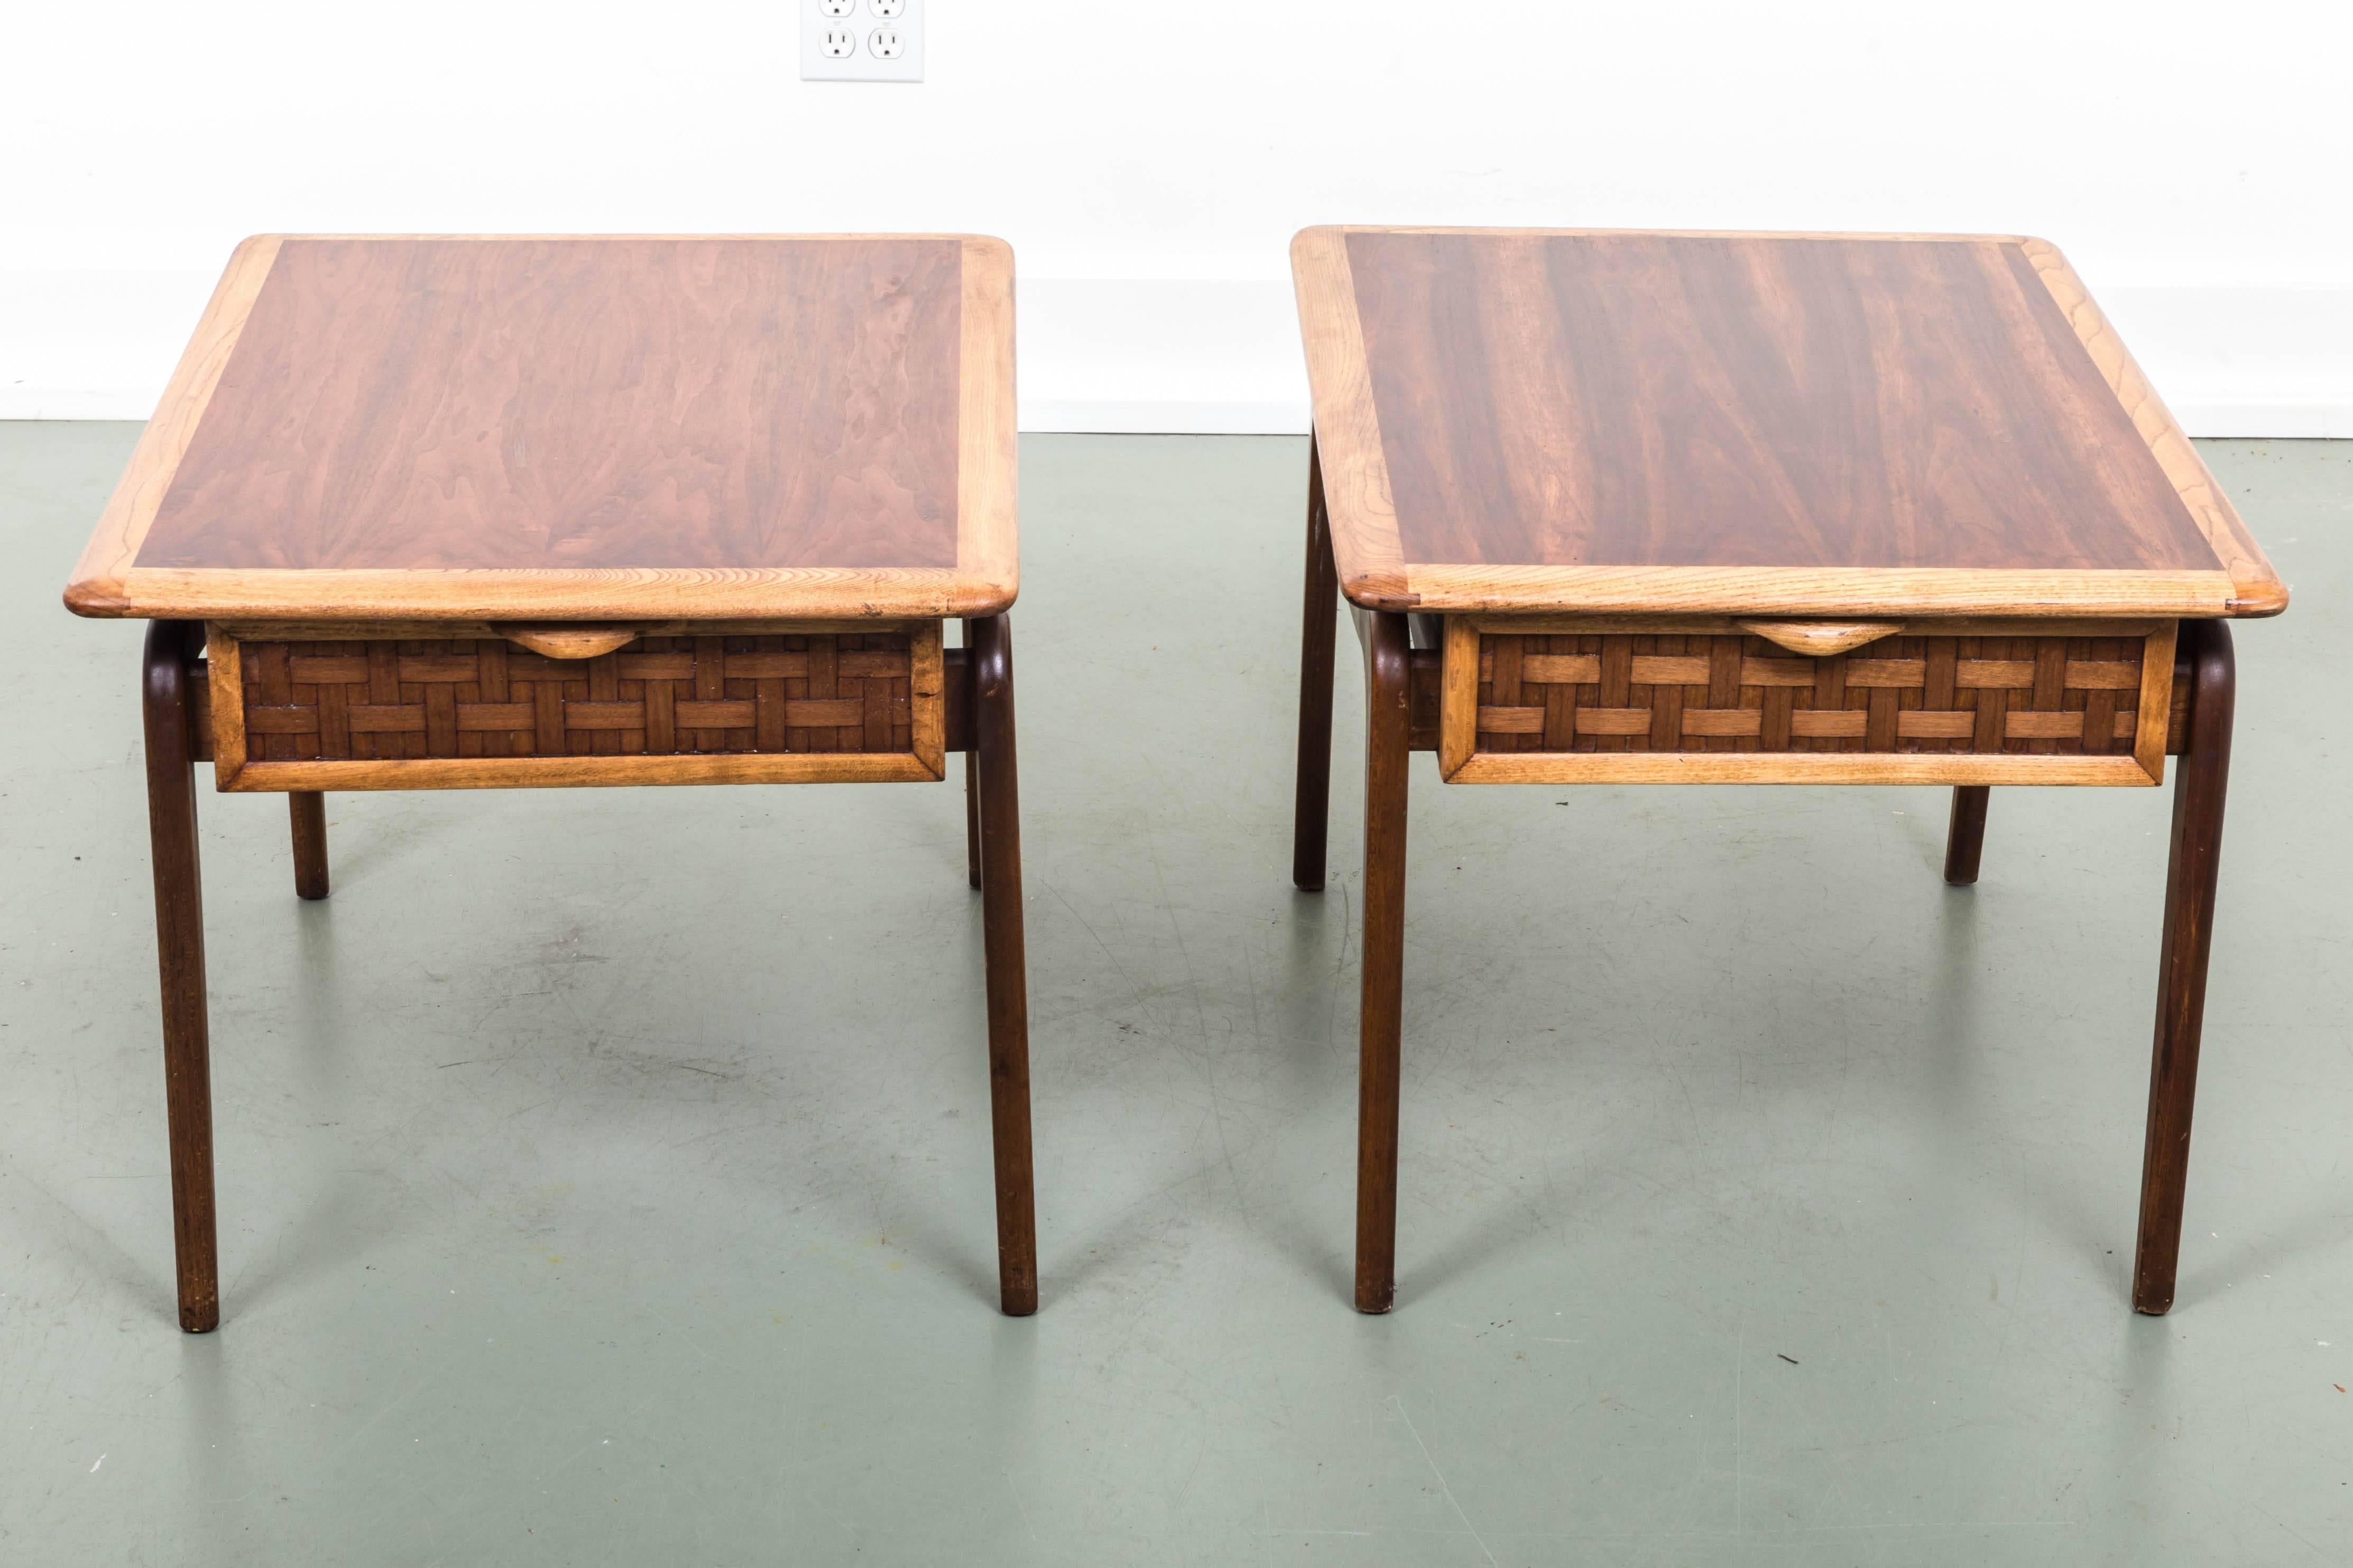 Pair of midcentury side tables, walnut and oak with basketweave fronted drawer, brass ball accents over tapered legs.